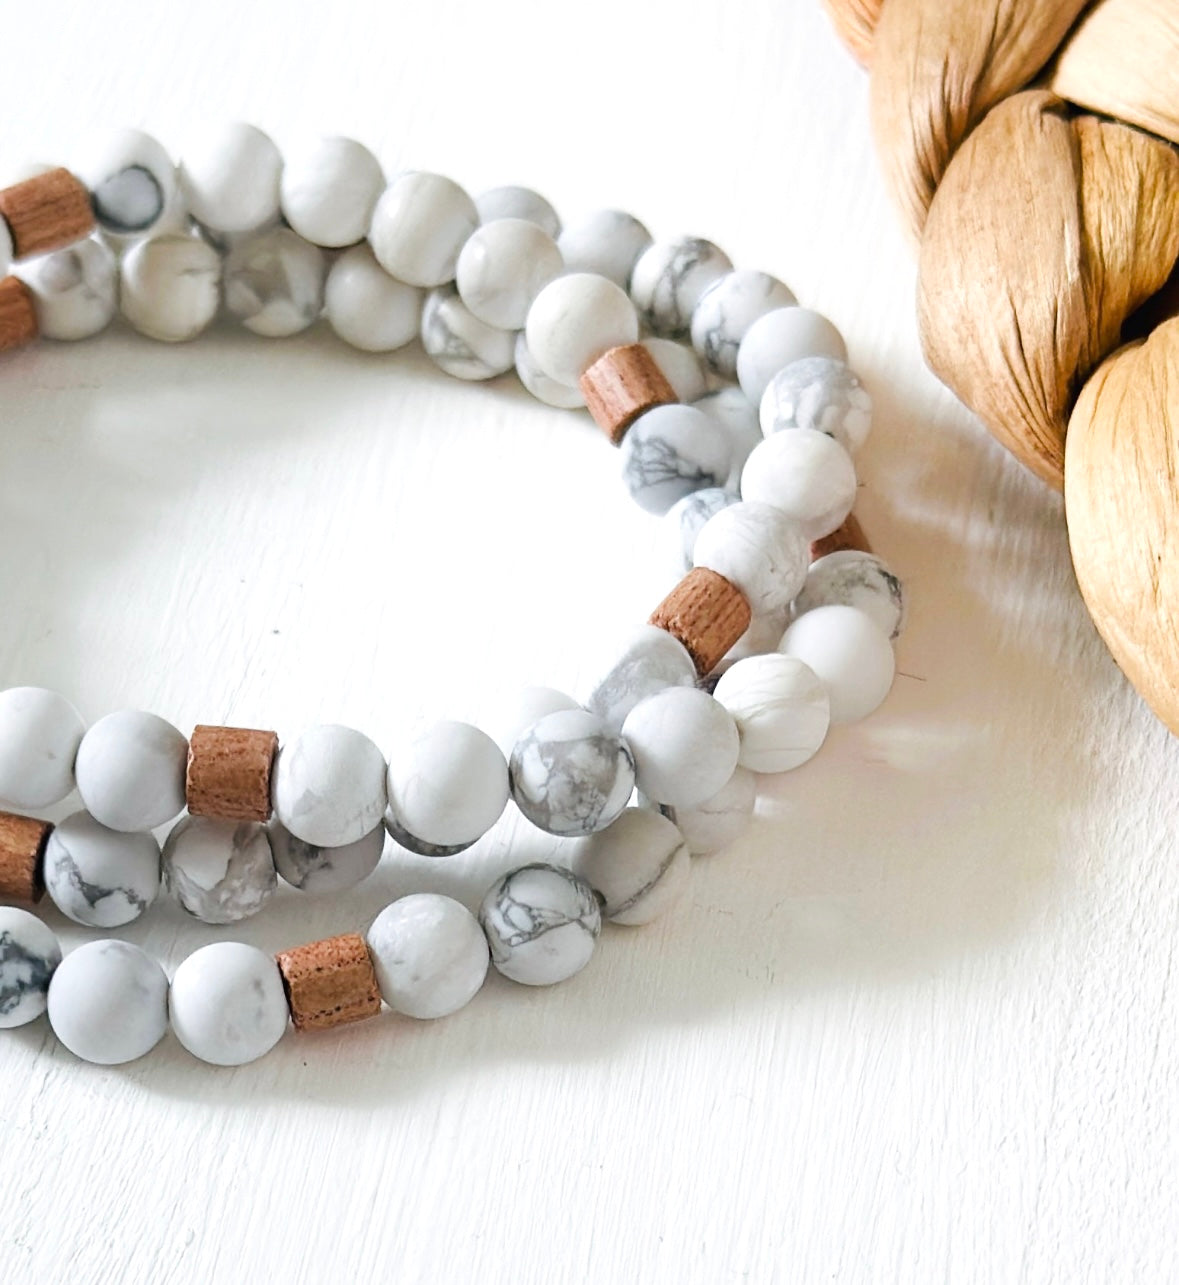 Matte Howlite gemstone wrap bracelet paired with Rosewood Rondelle beads for calming stress